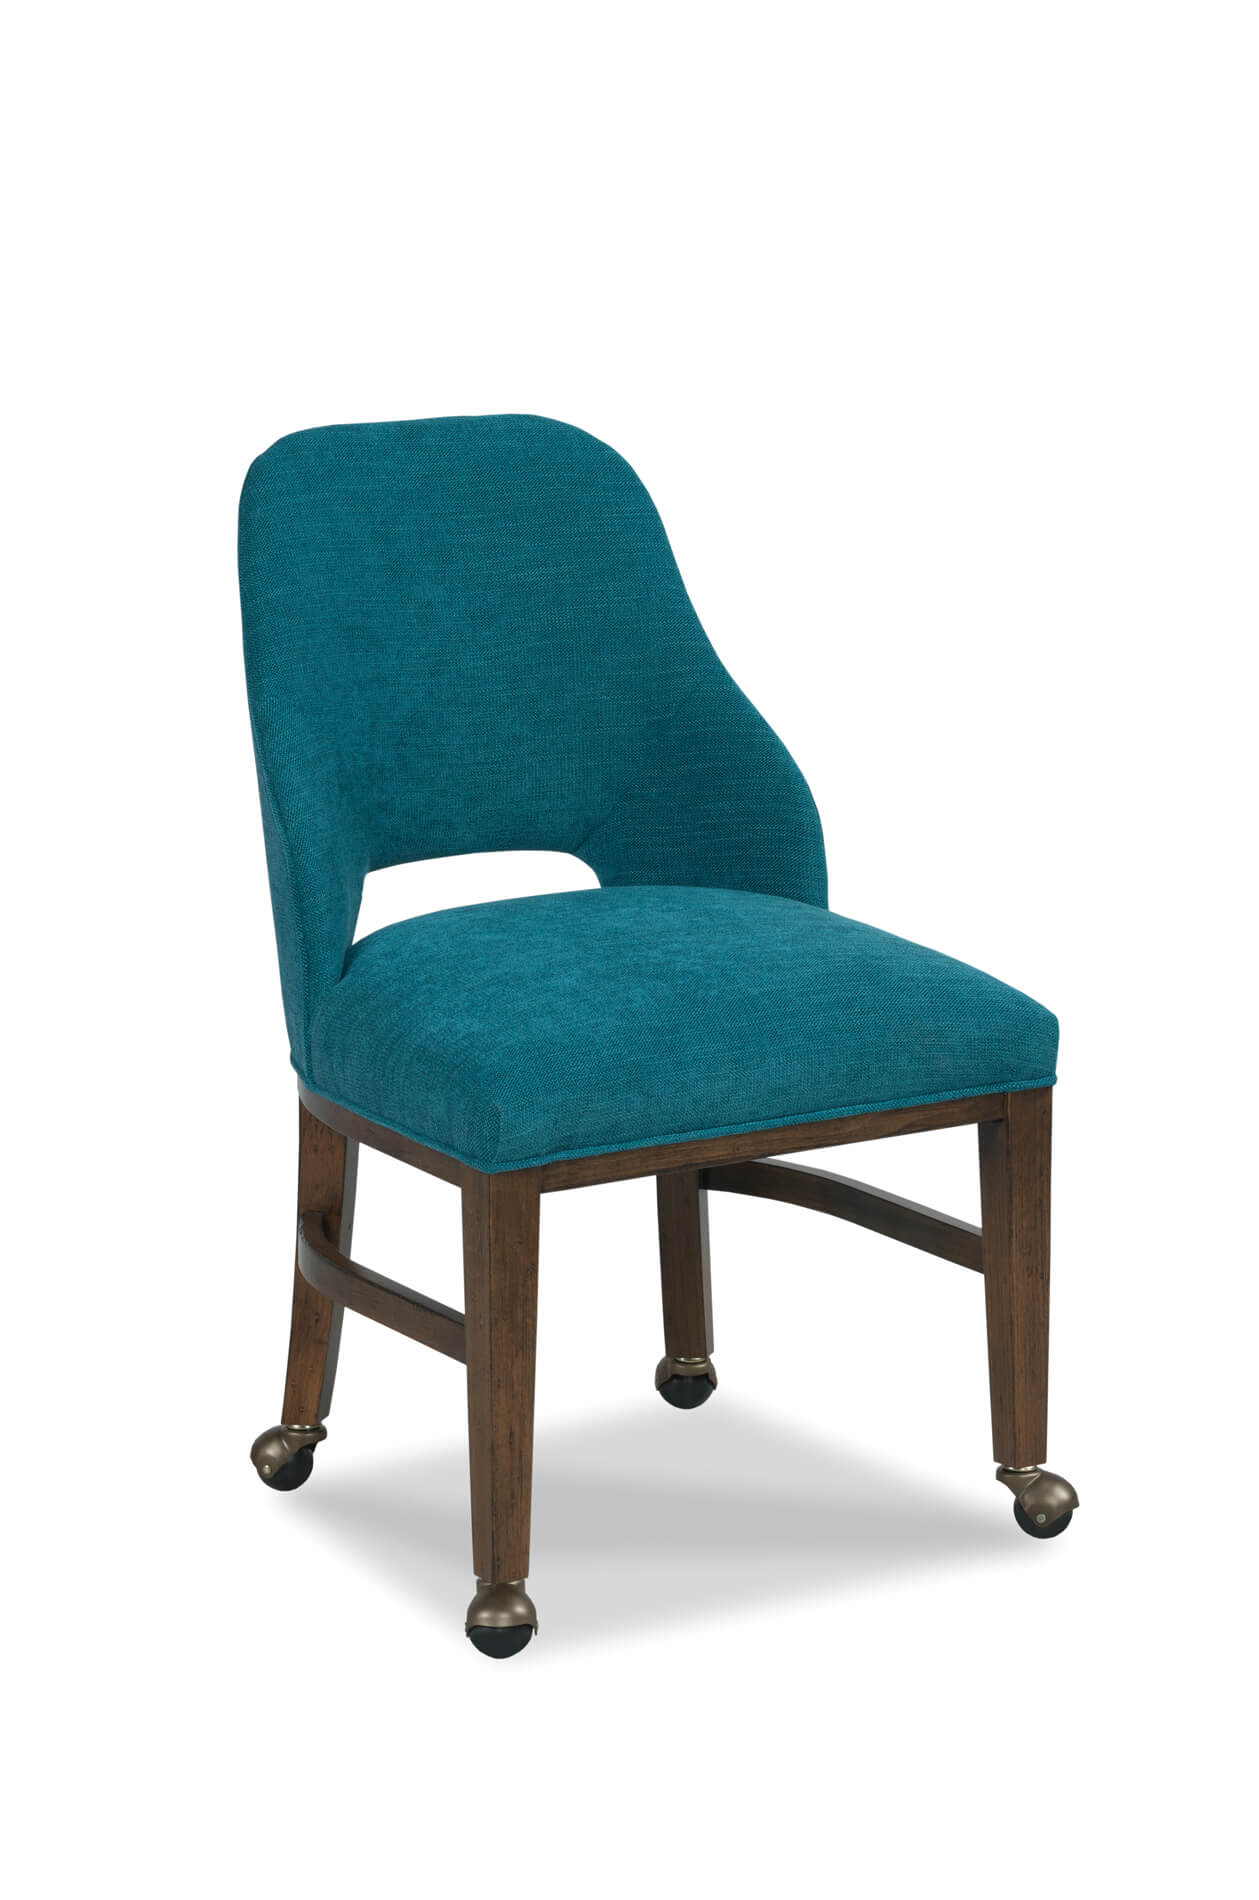 Darien Upholstered Dining Chair, Padded Dining Room Chairs With Wheels